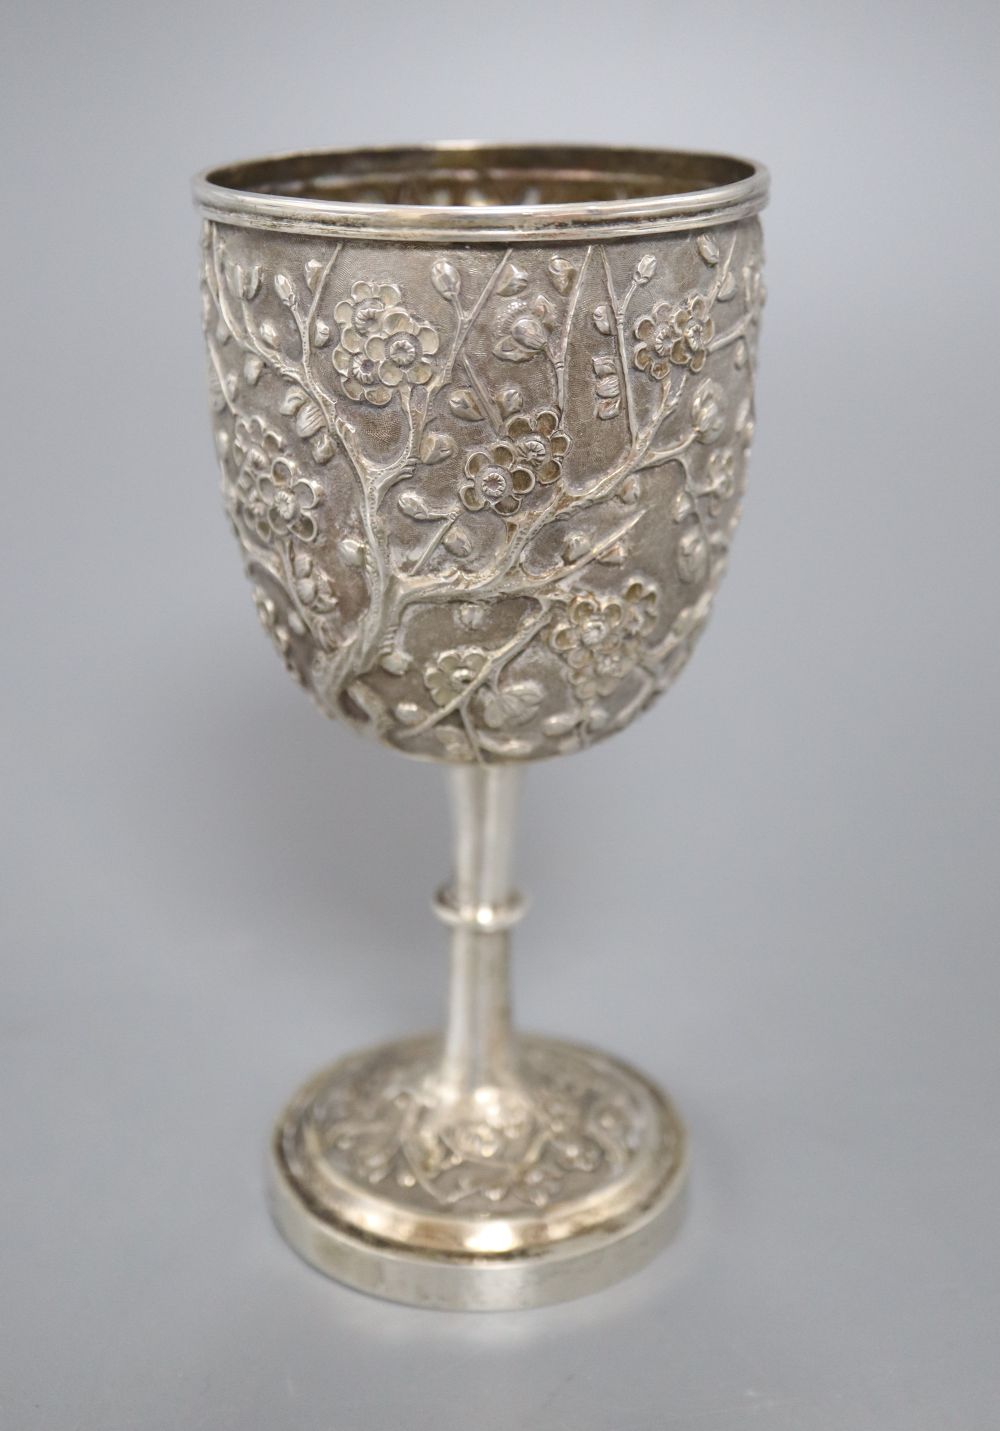 An early 20th century Chinese Export white metal goblet by Wang Hing, Hong Kong, 14.2cm, 159 grams.